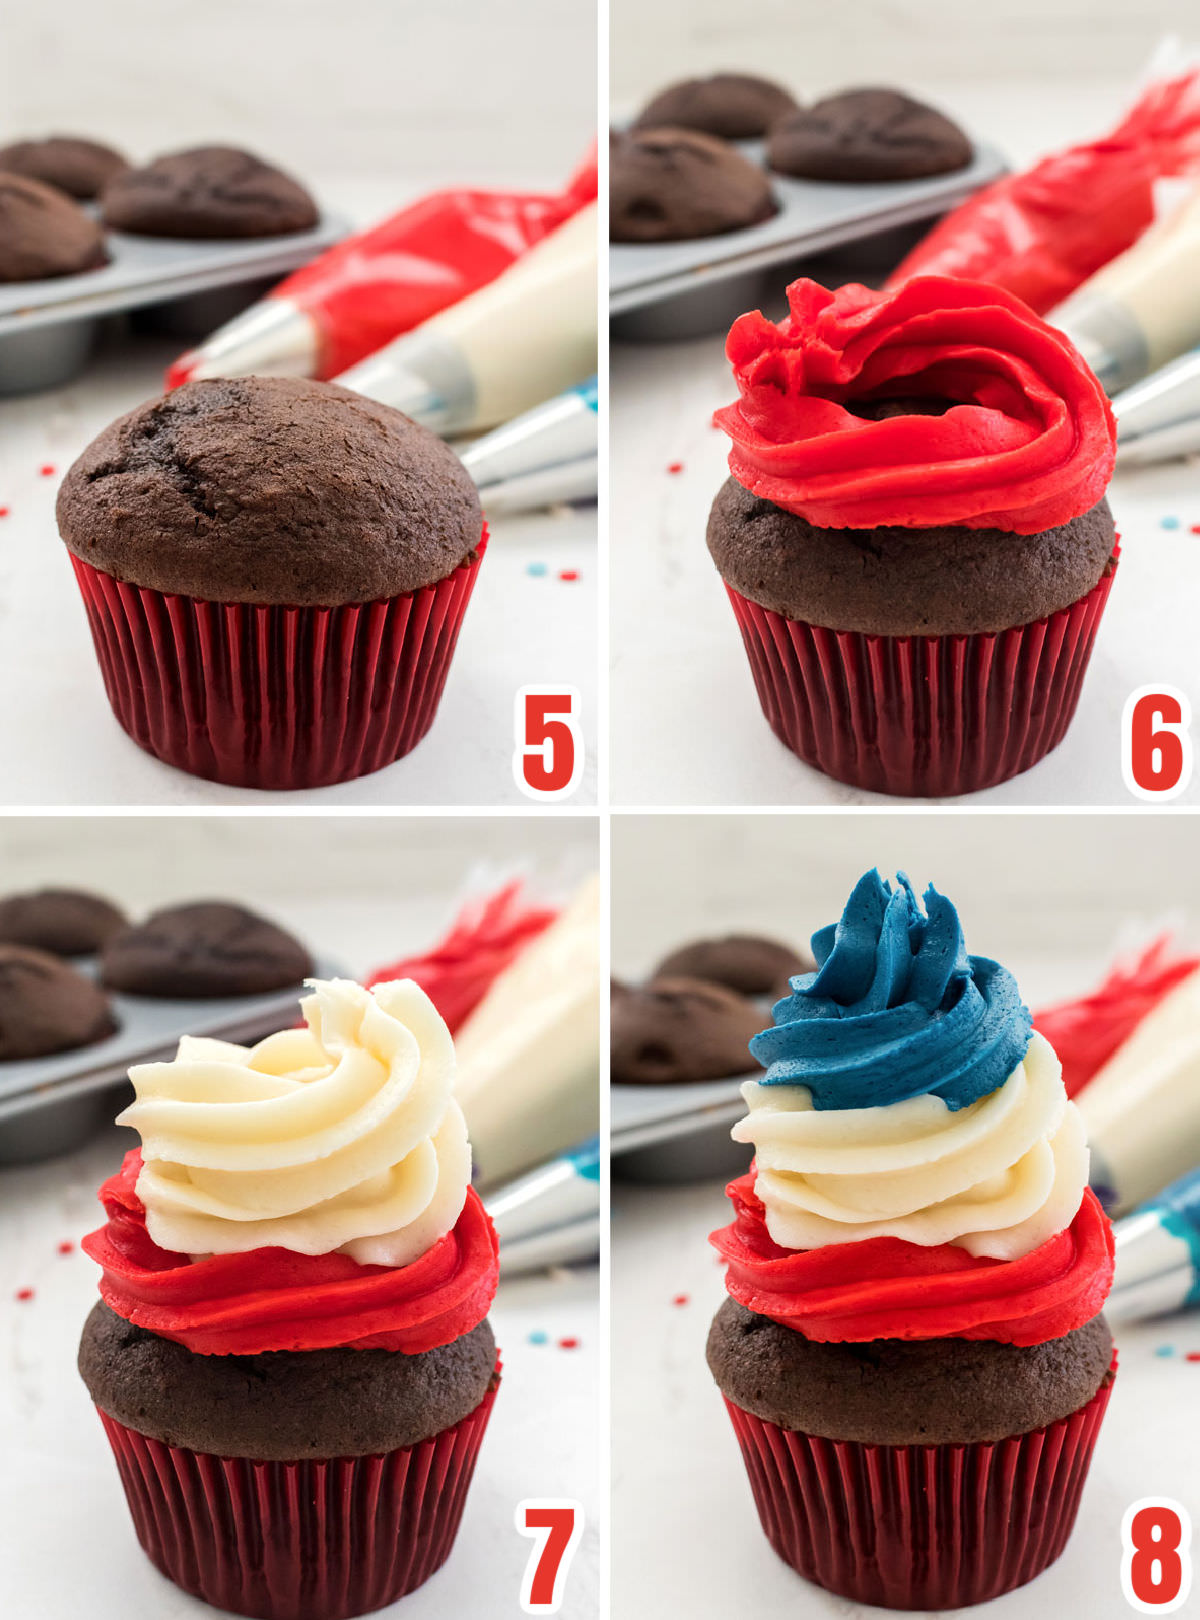 Collage image showing how to make the multi-colored swirl of frosting for the Patriotic Swirl Cupcake.